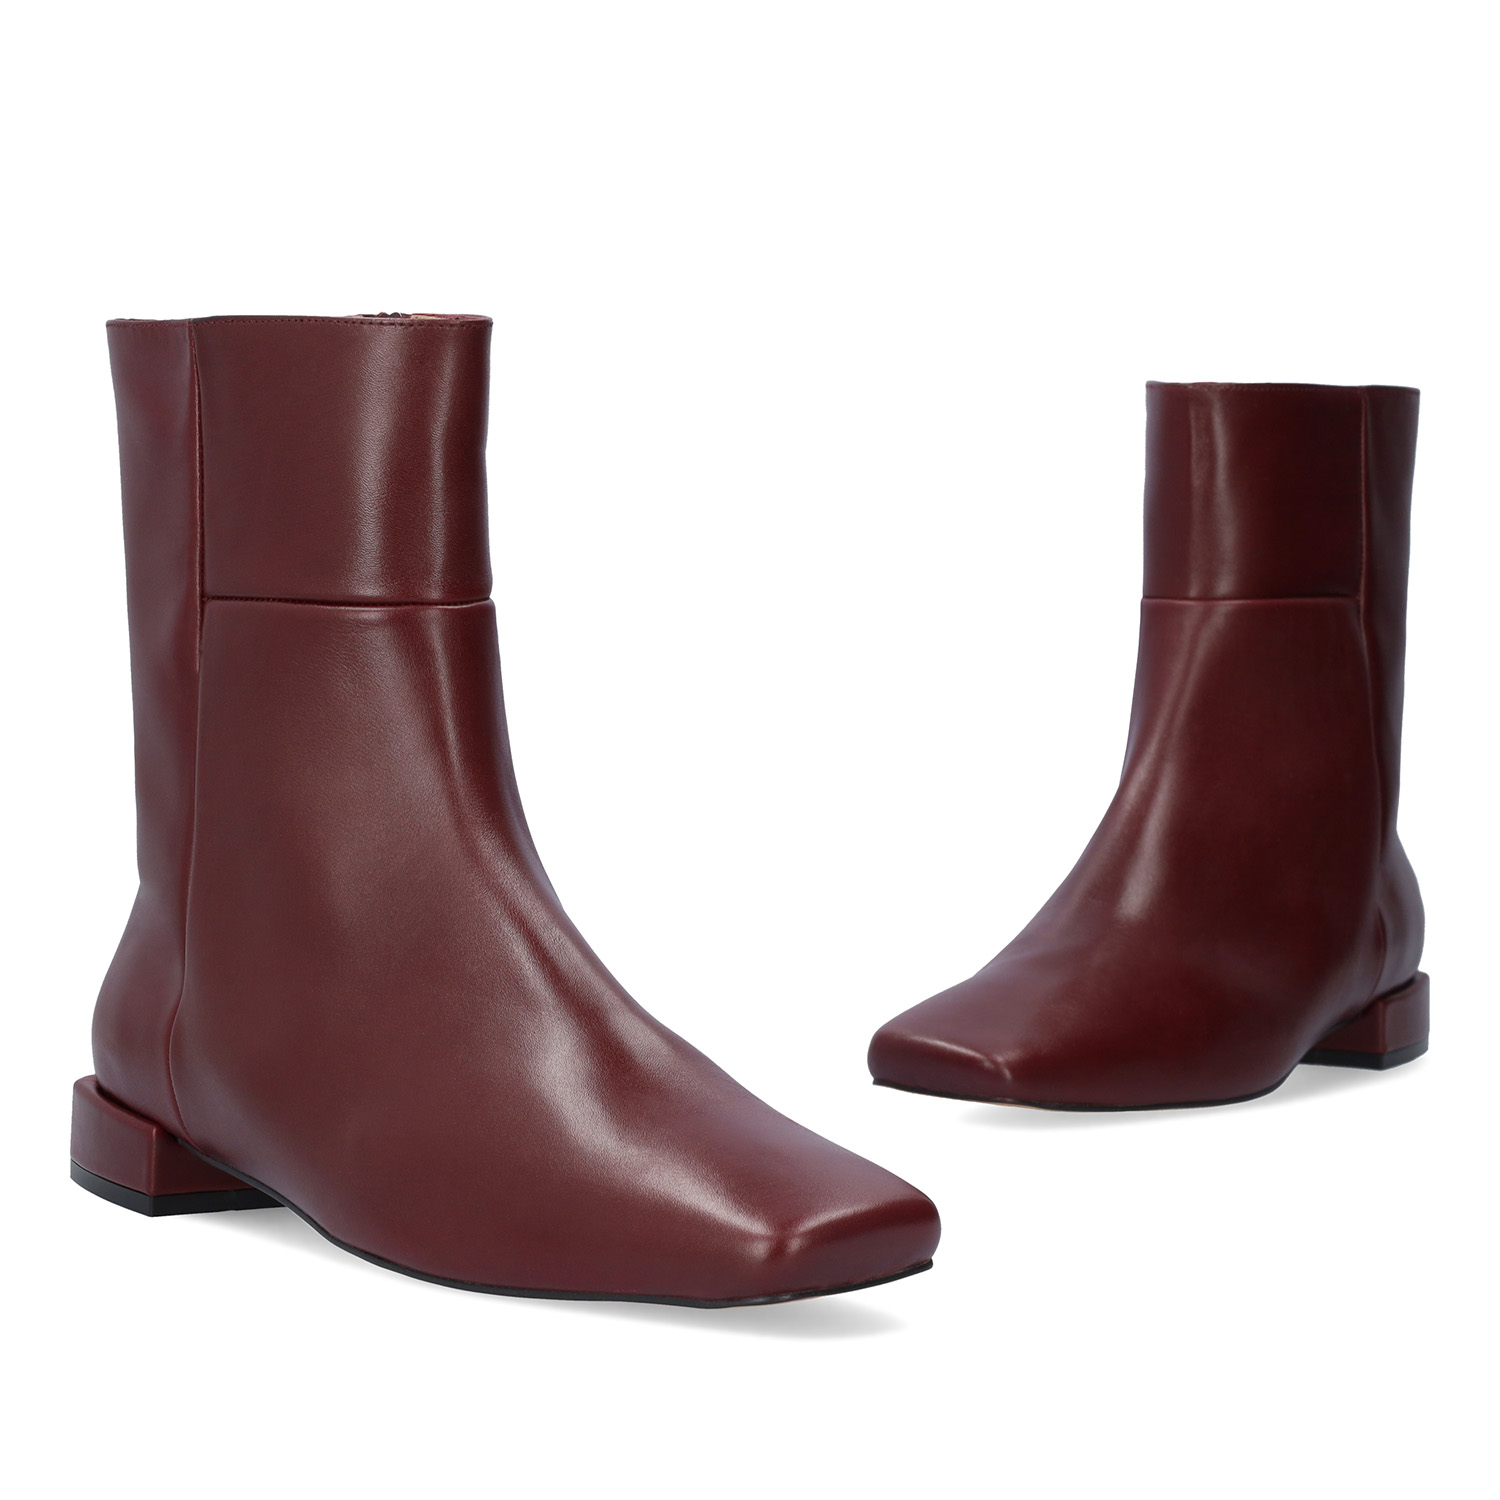 High top burgundy leather booties 